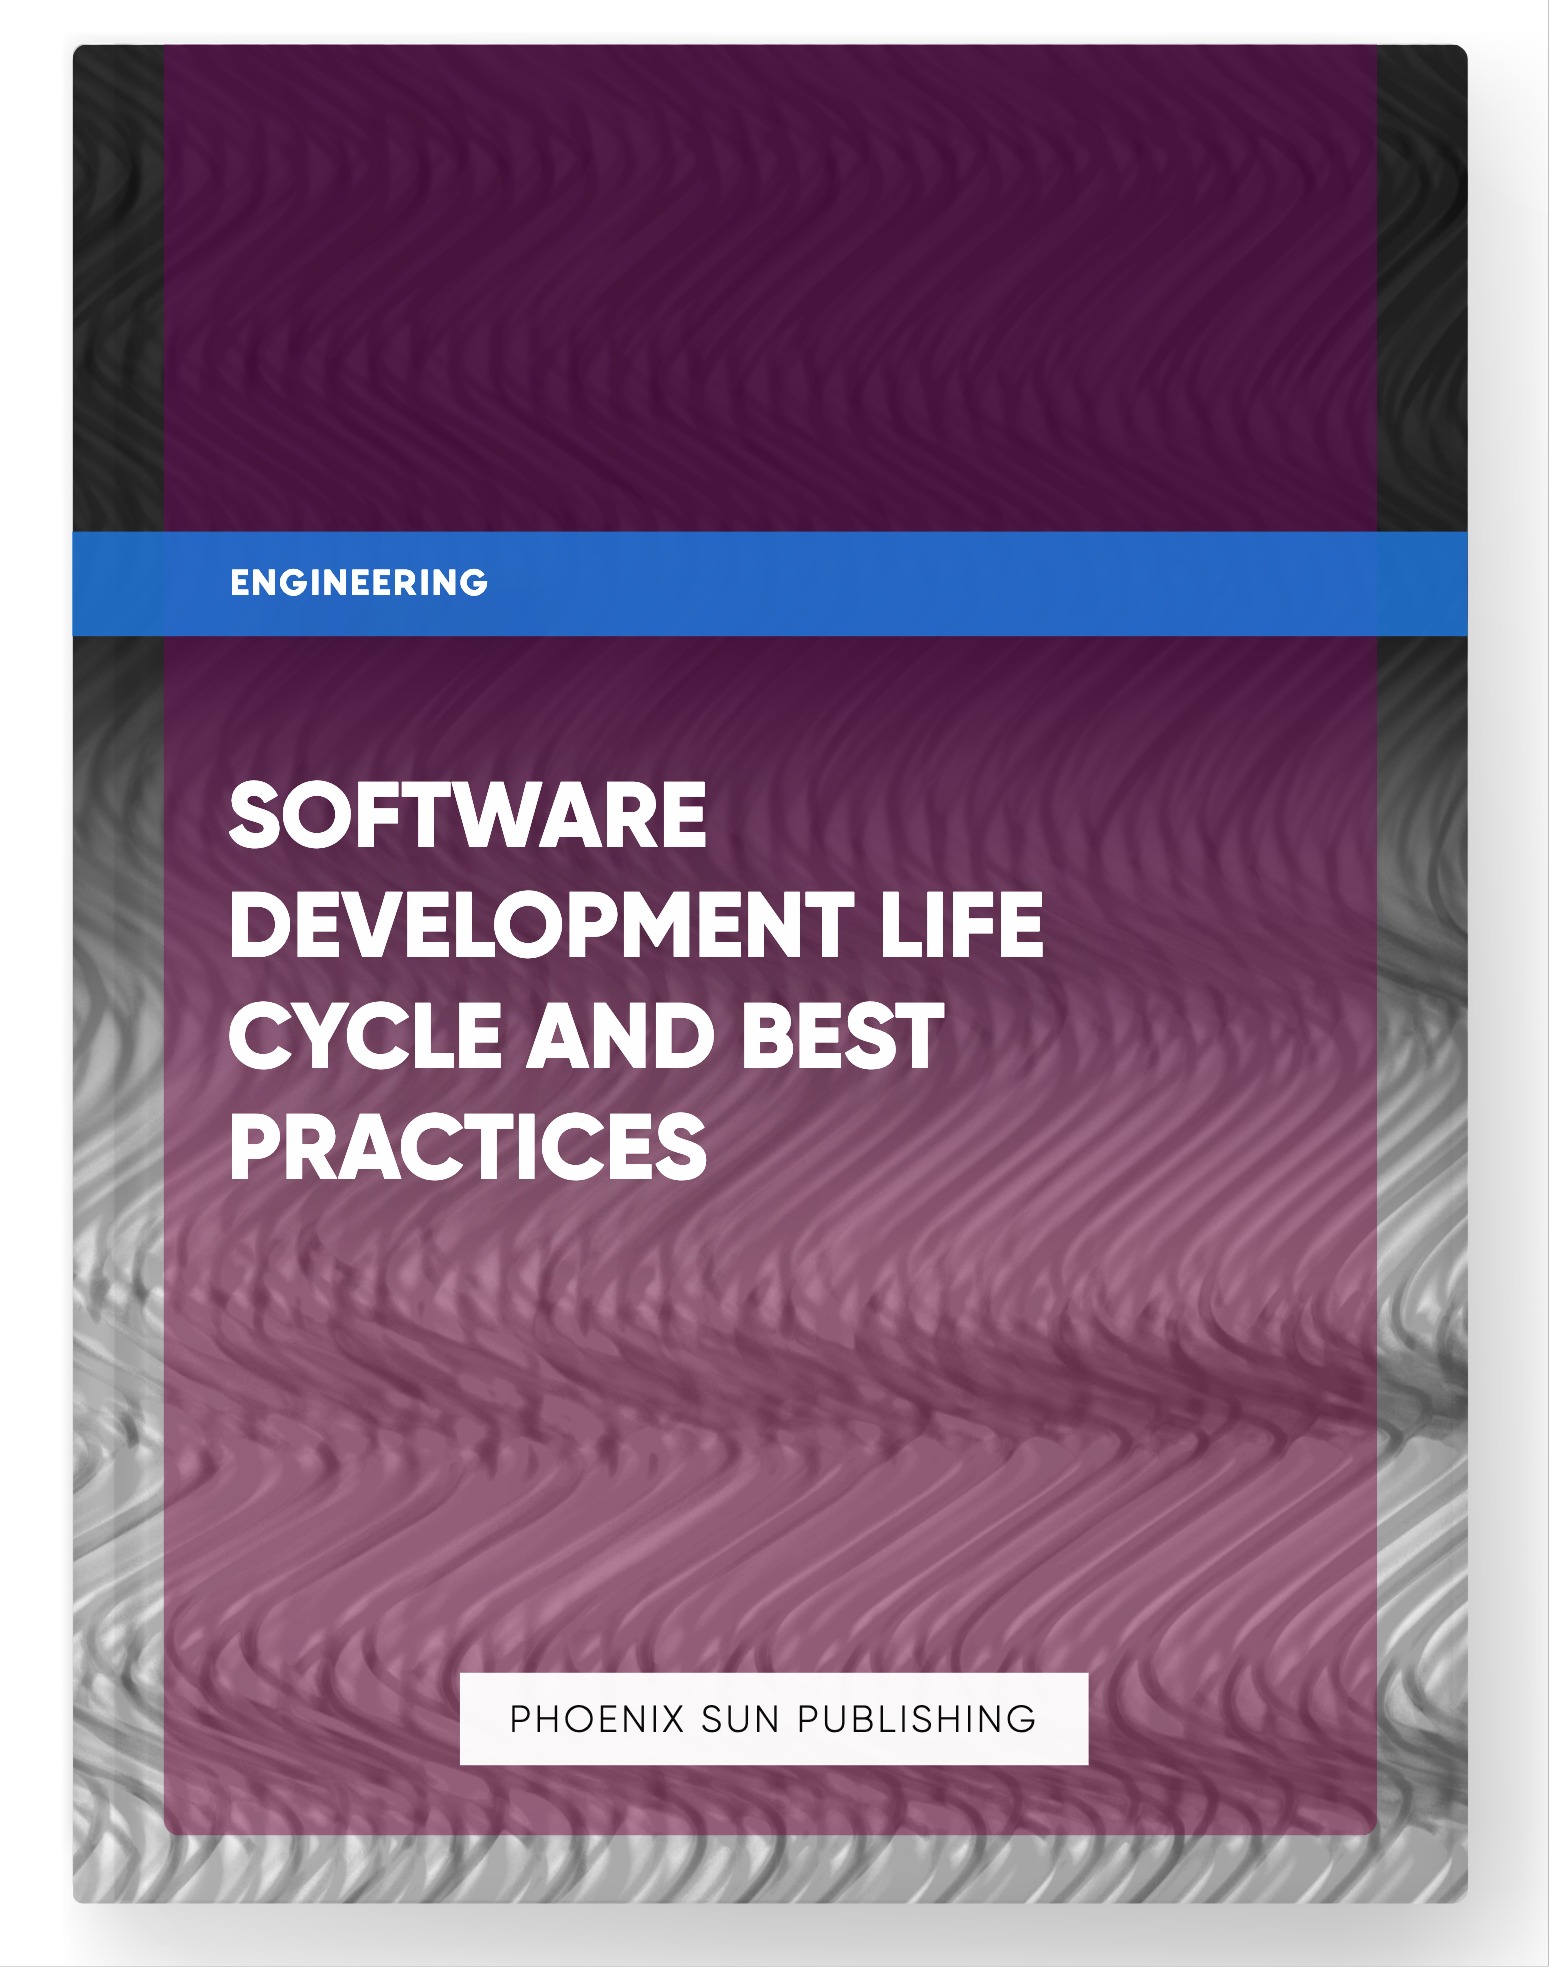 Software Development Life Cycle and Best Practices